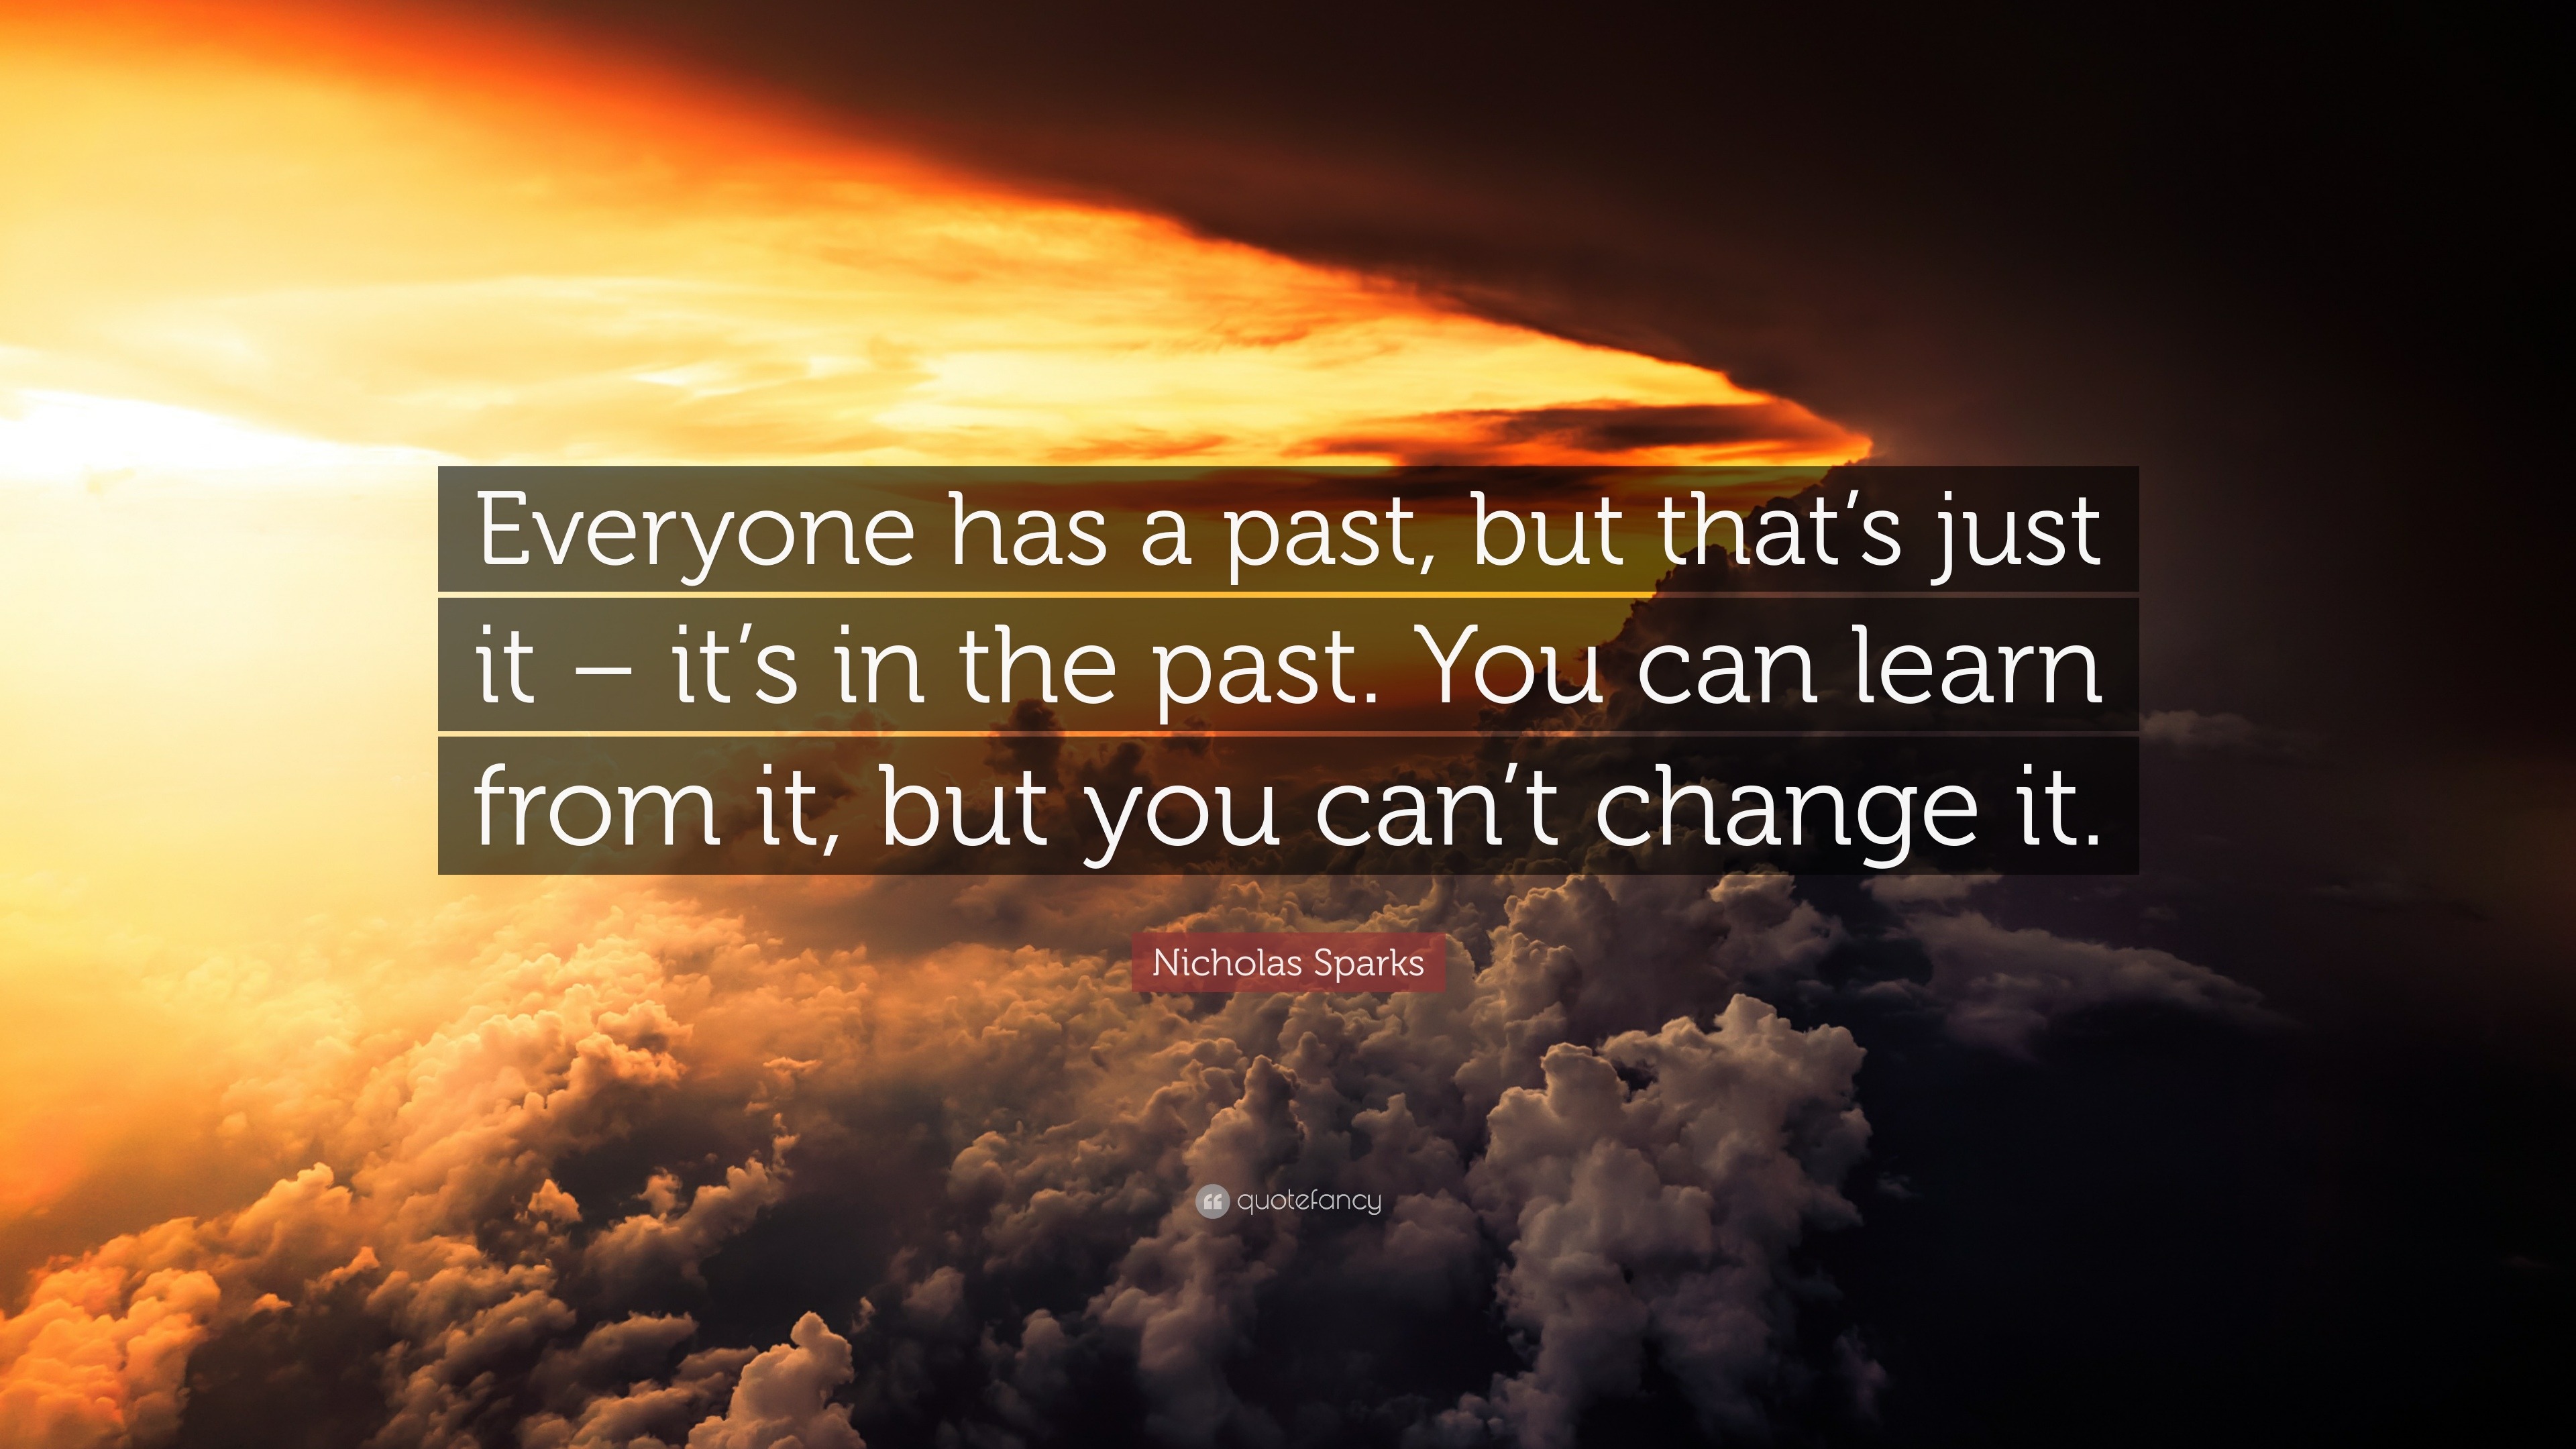 Nicholas Sparks Quote: “Everyone has a past, but that’s just it – it’s ...